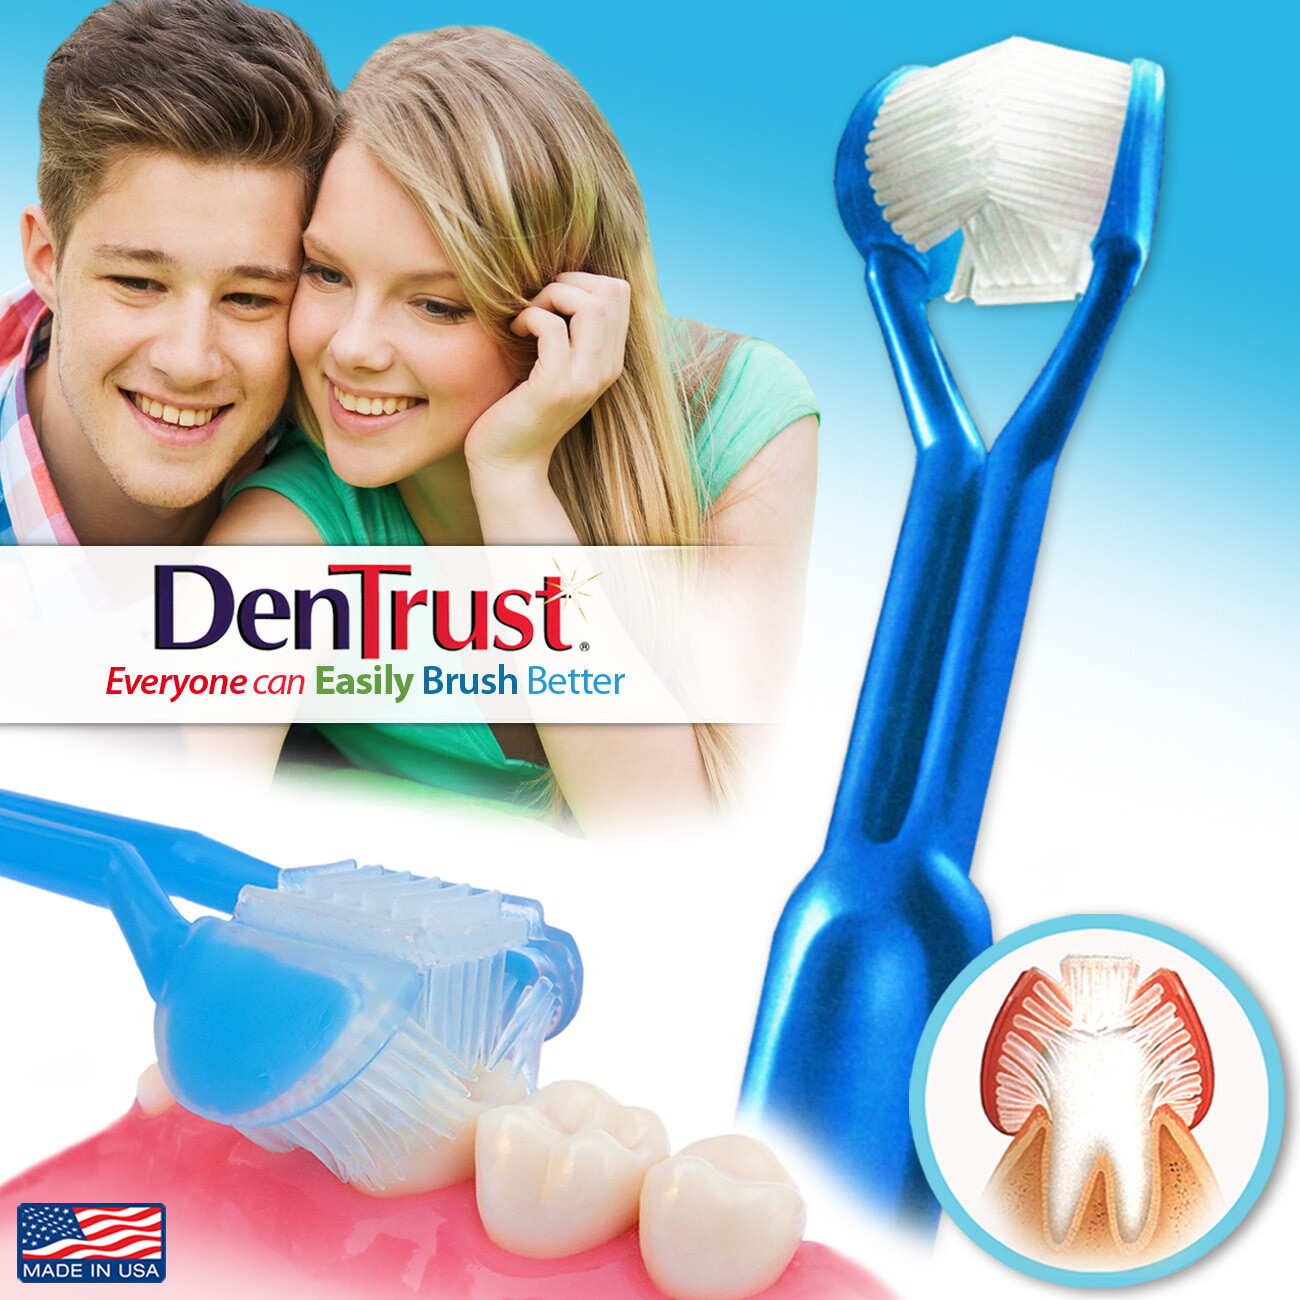 DenTrust | The Only Child-Safe 3-SIDED Toothbrush | Made in USA | Easily Brush Better | Clinically Proven Results | Triple Clean White Smile Fresh Breath | Kids Children Braces Special Needs XMAS GIFT